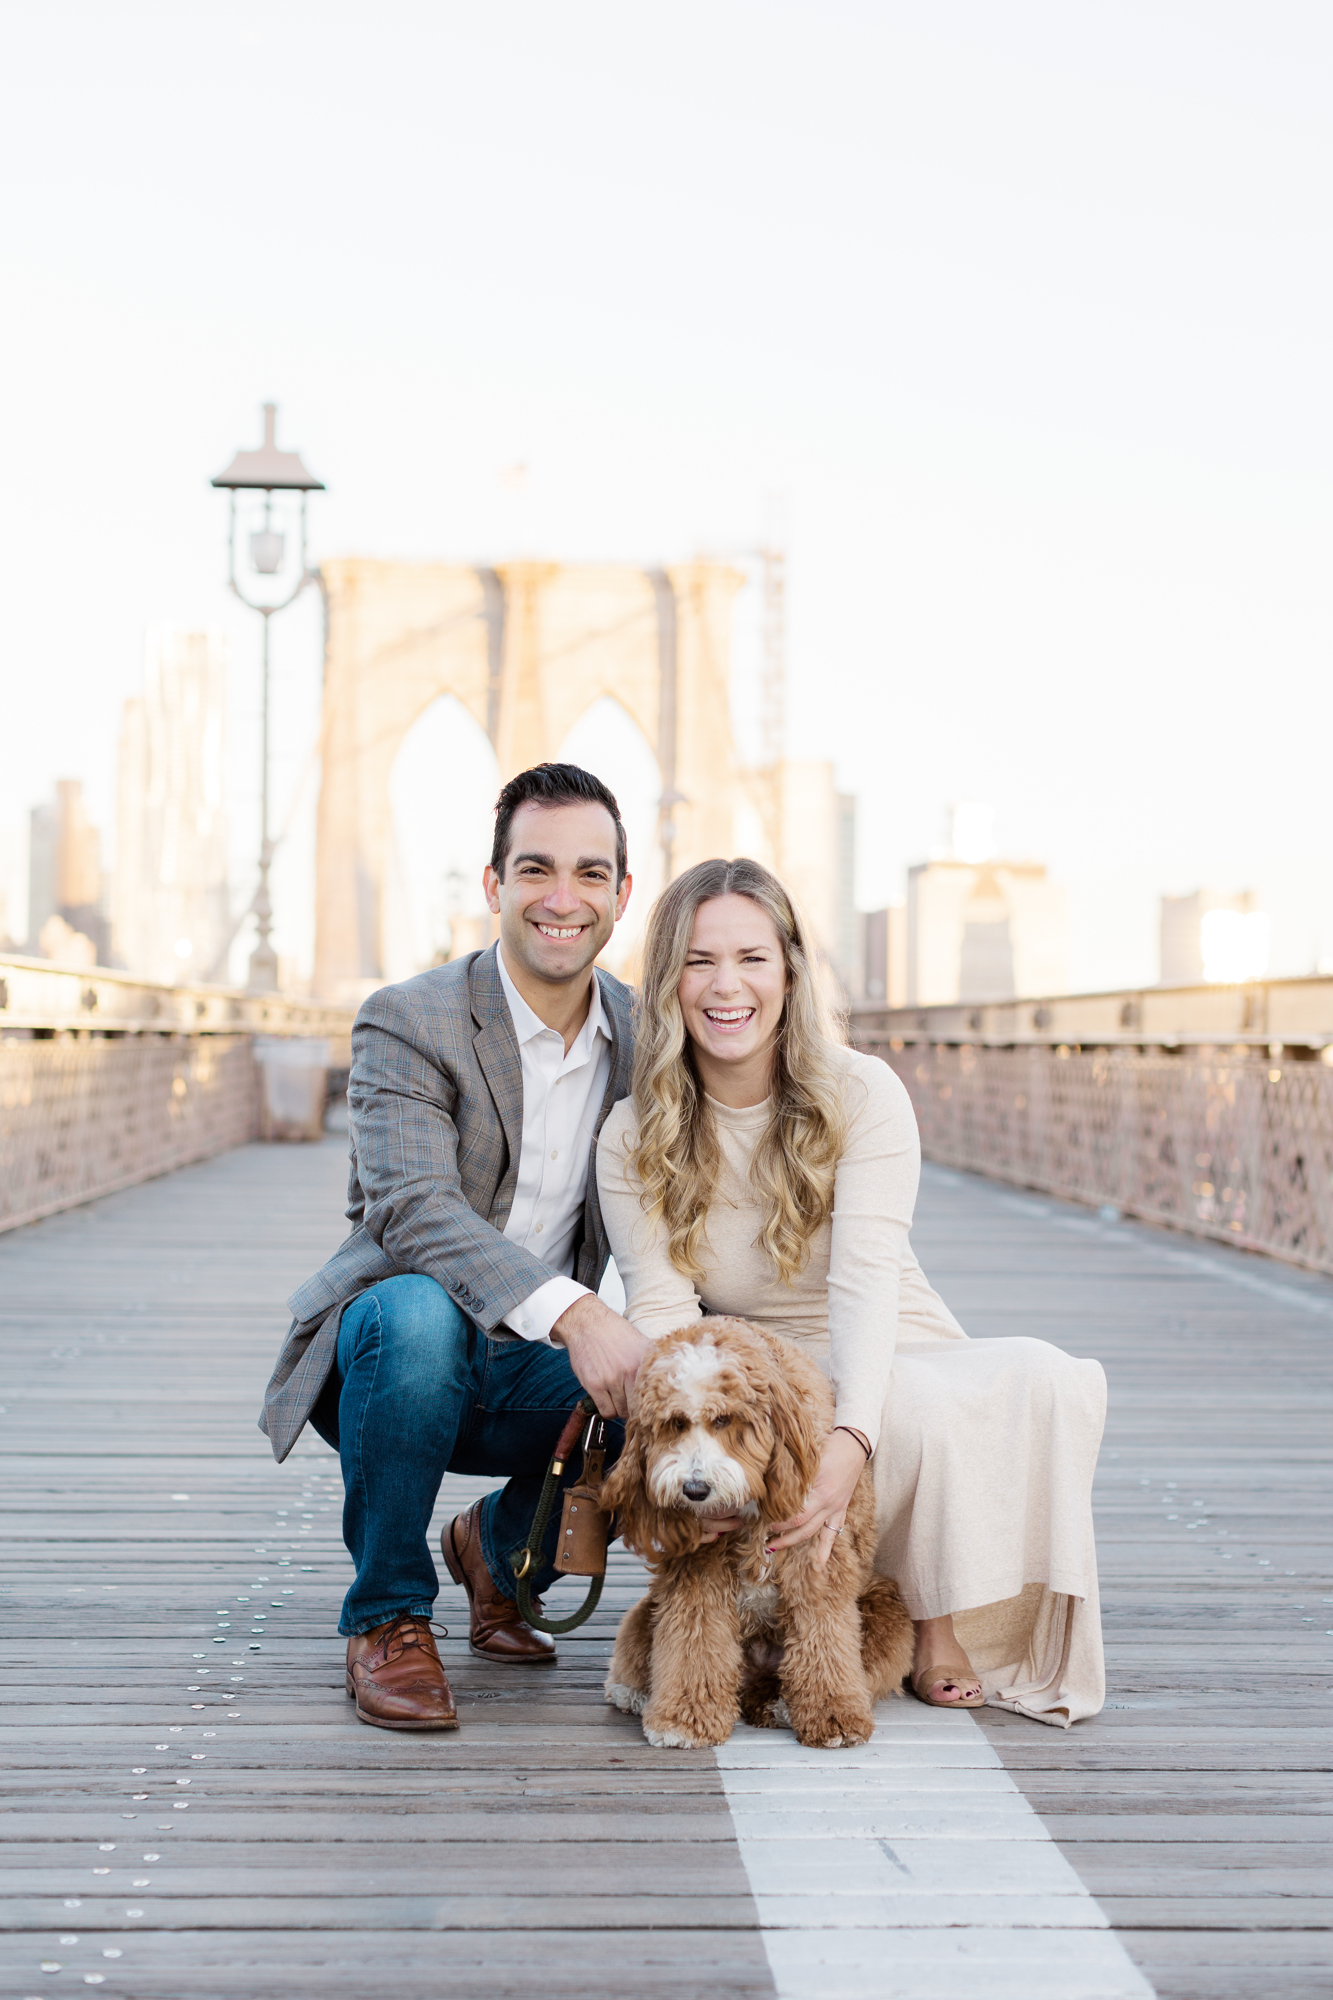 Charming DUMBO Engagement Photos with Couple's Dog